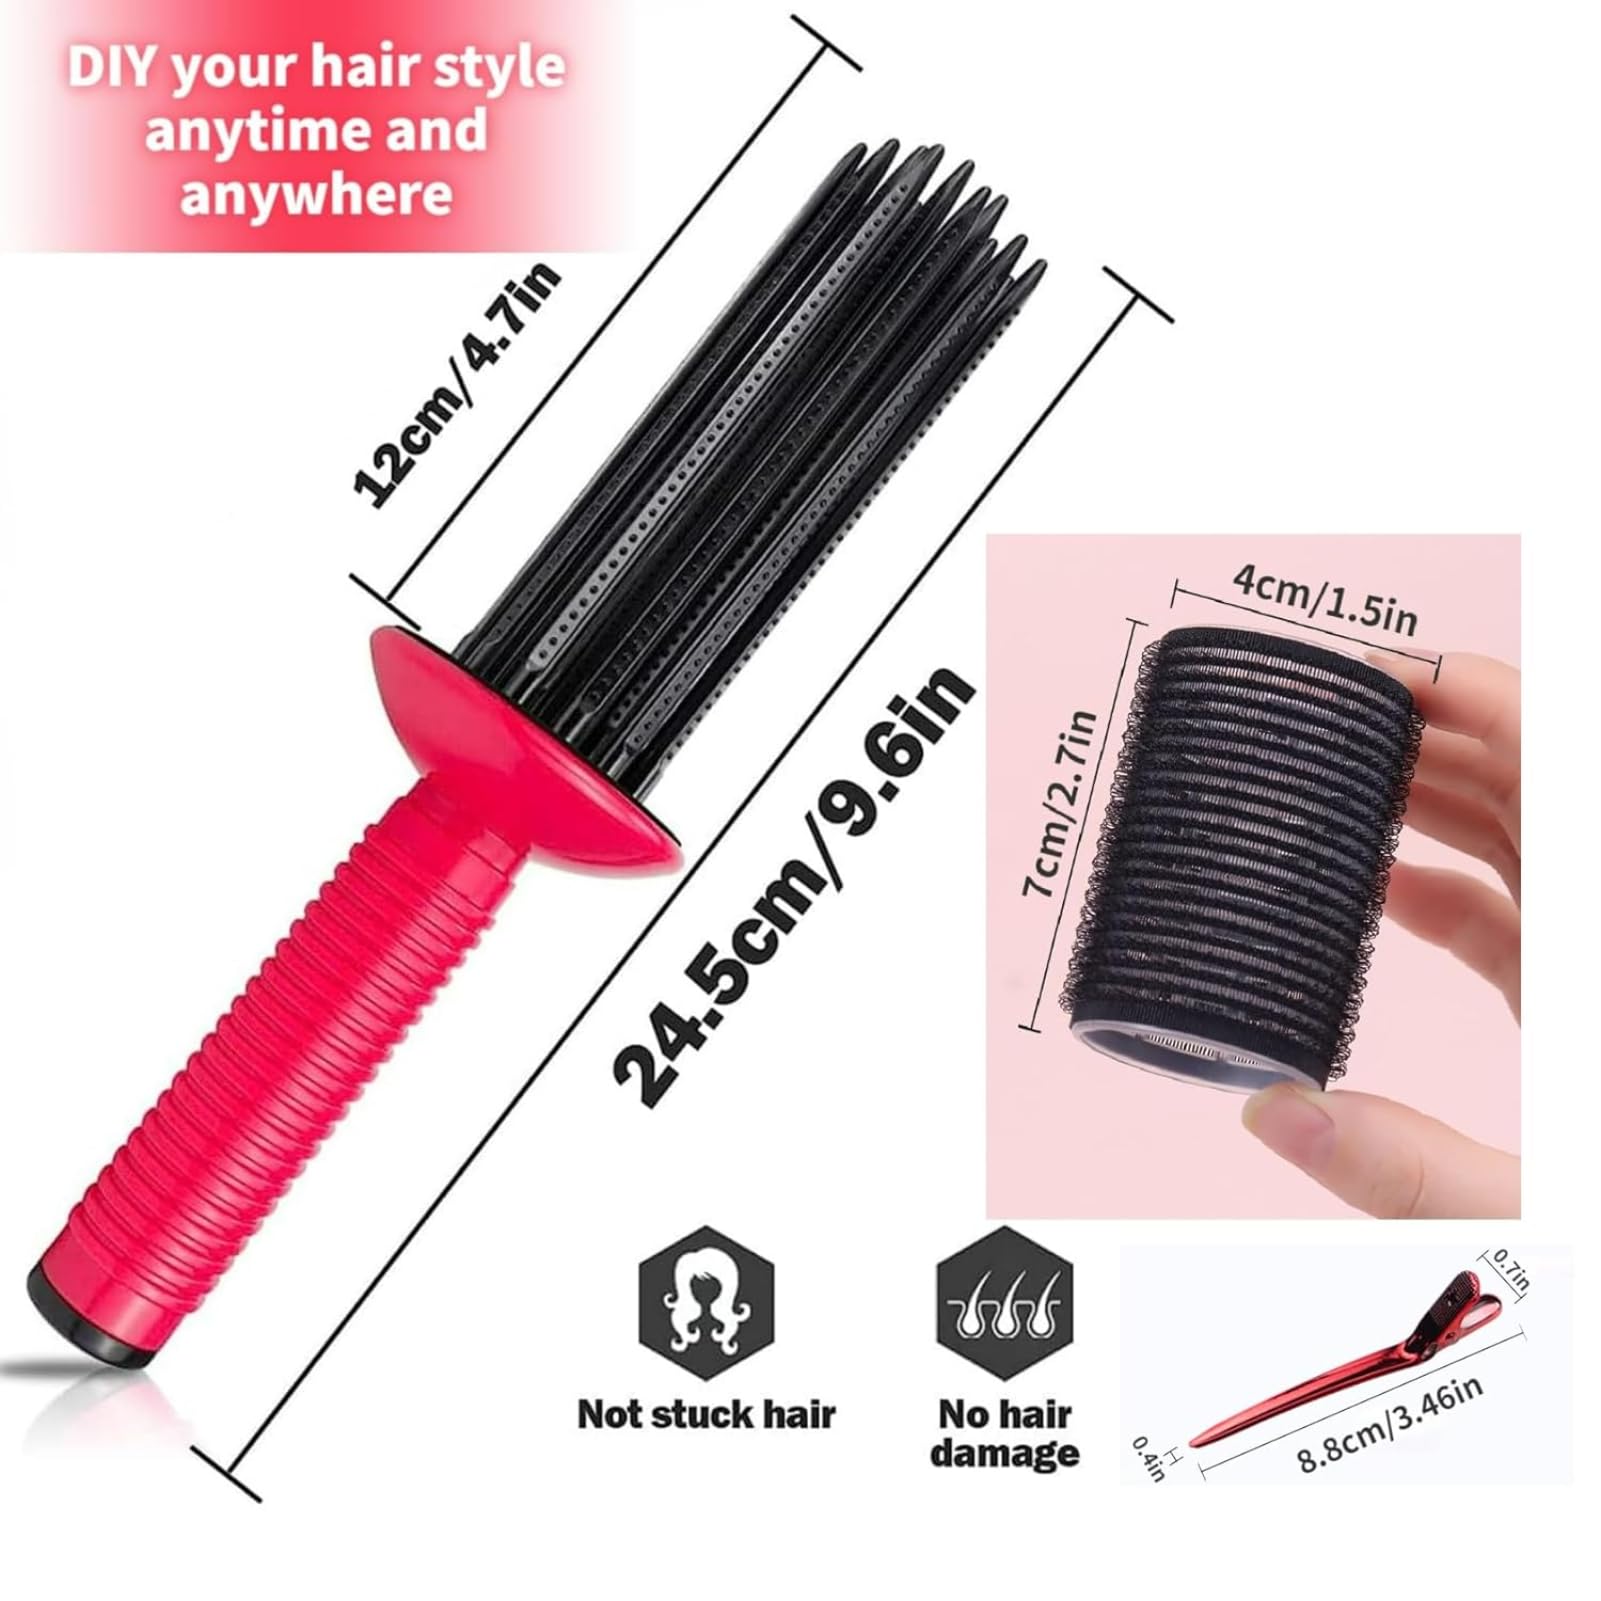 Neuvikter Self-Grip Hair Rollers with Hair Roller Clips and Comb, Hair Roller Set, Hair Brush Styler for Curly Hair, Air Volume Comb for DIY Hair Styles (5Pcs-Pink)